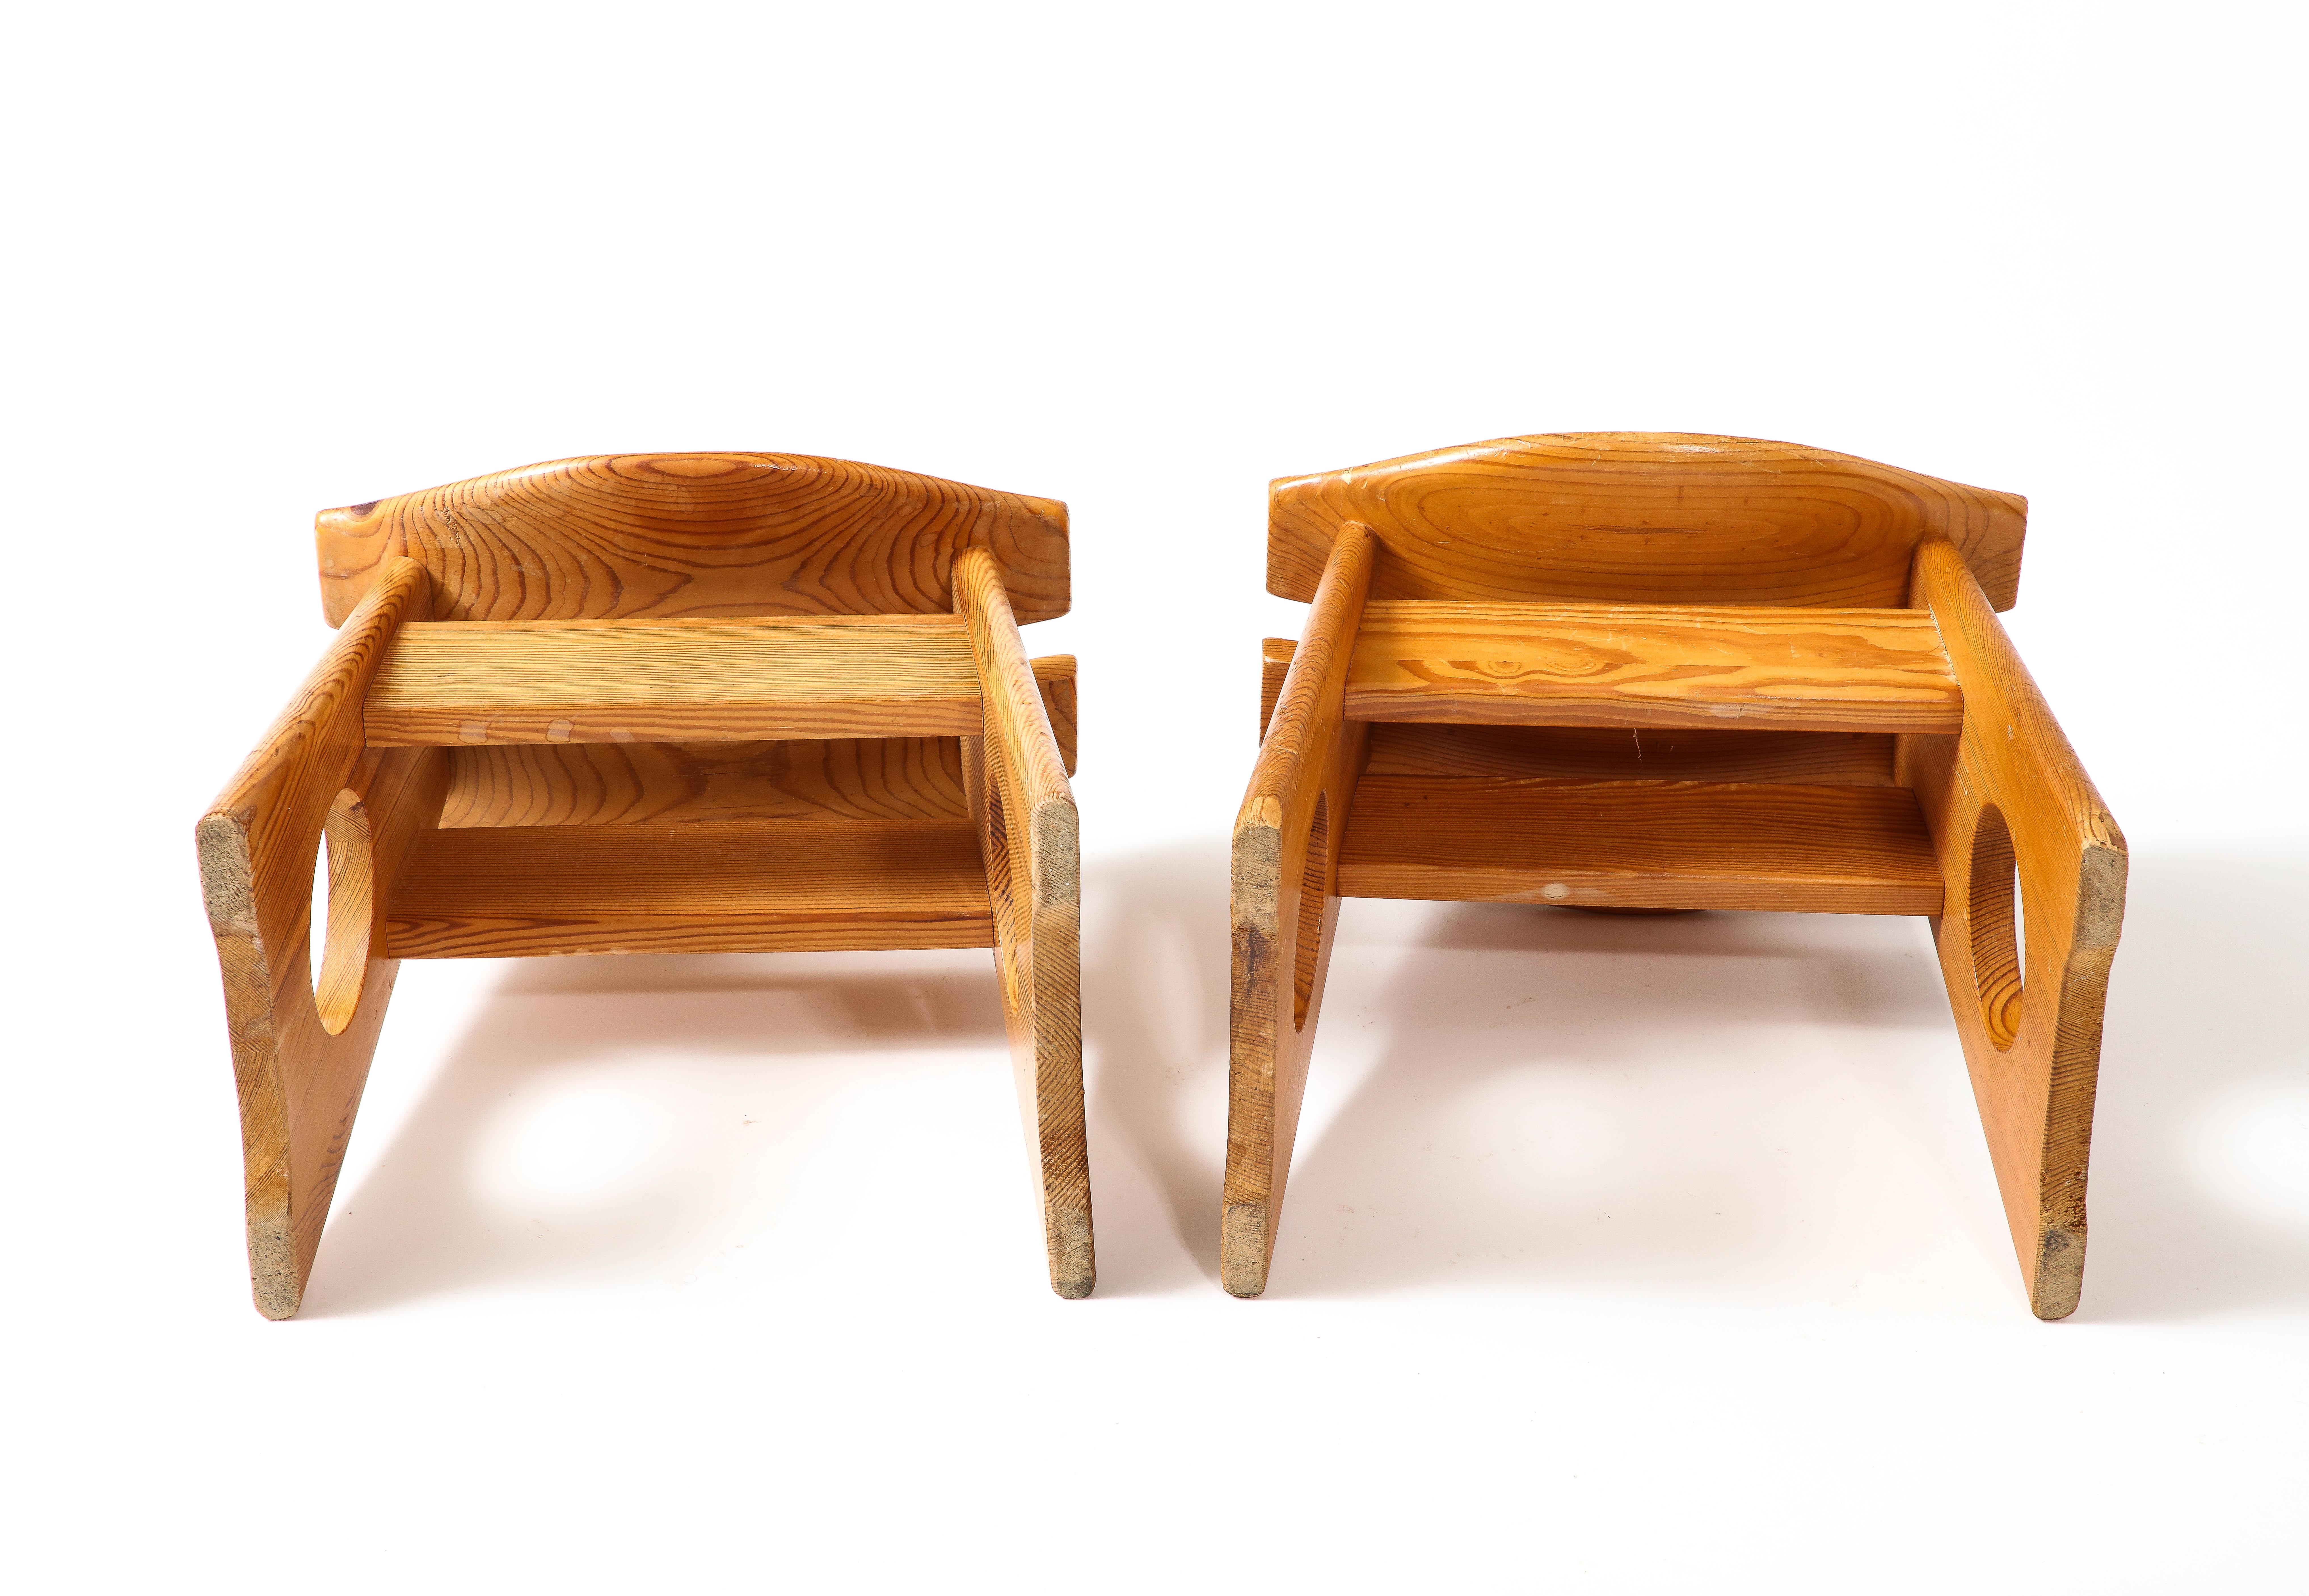 Stools by Gilbert Marklund, Sweden 1960s For Sale 3